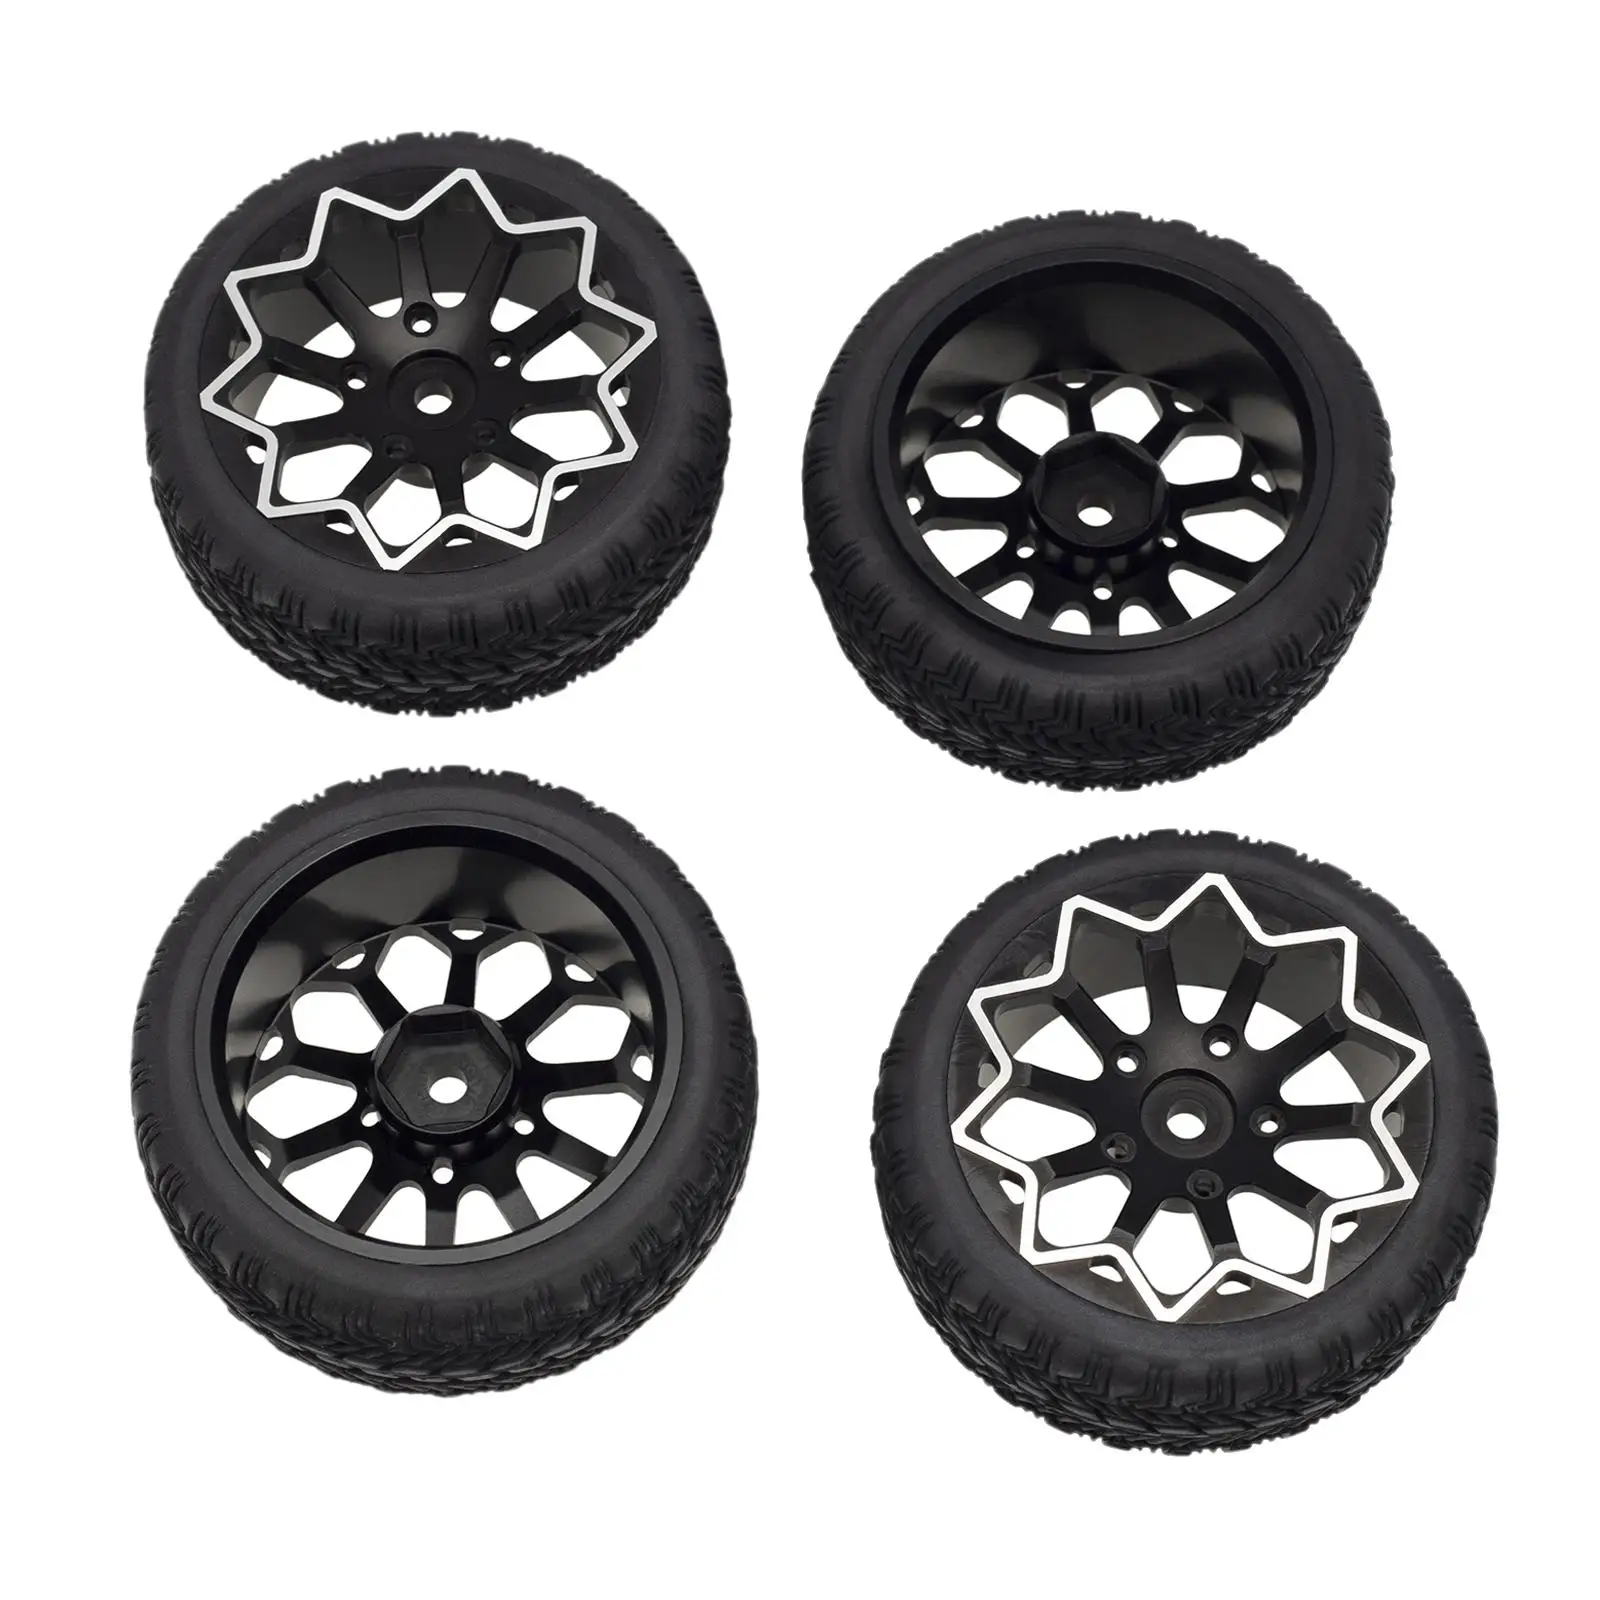 12mm Wheel Hubs RC Tire Tyres, Spare Parts Accessories for 1:10 Trucks Crawler Modified Car DIY Accs